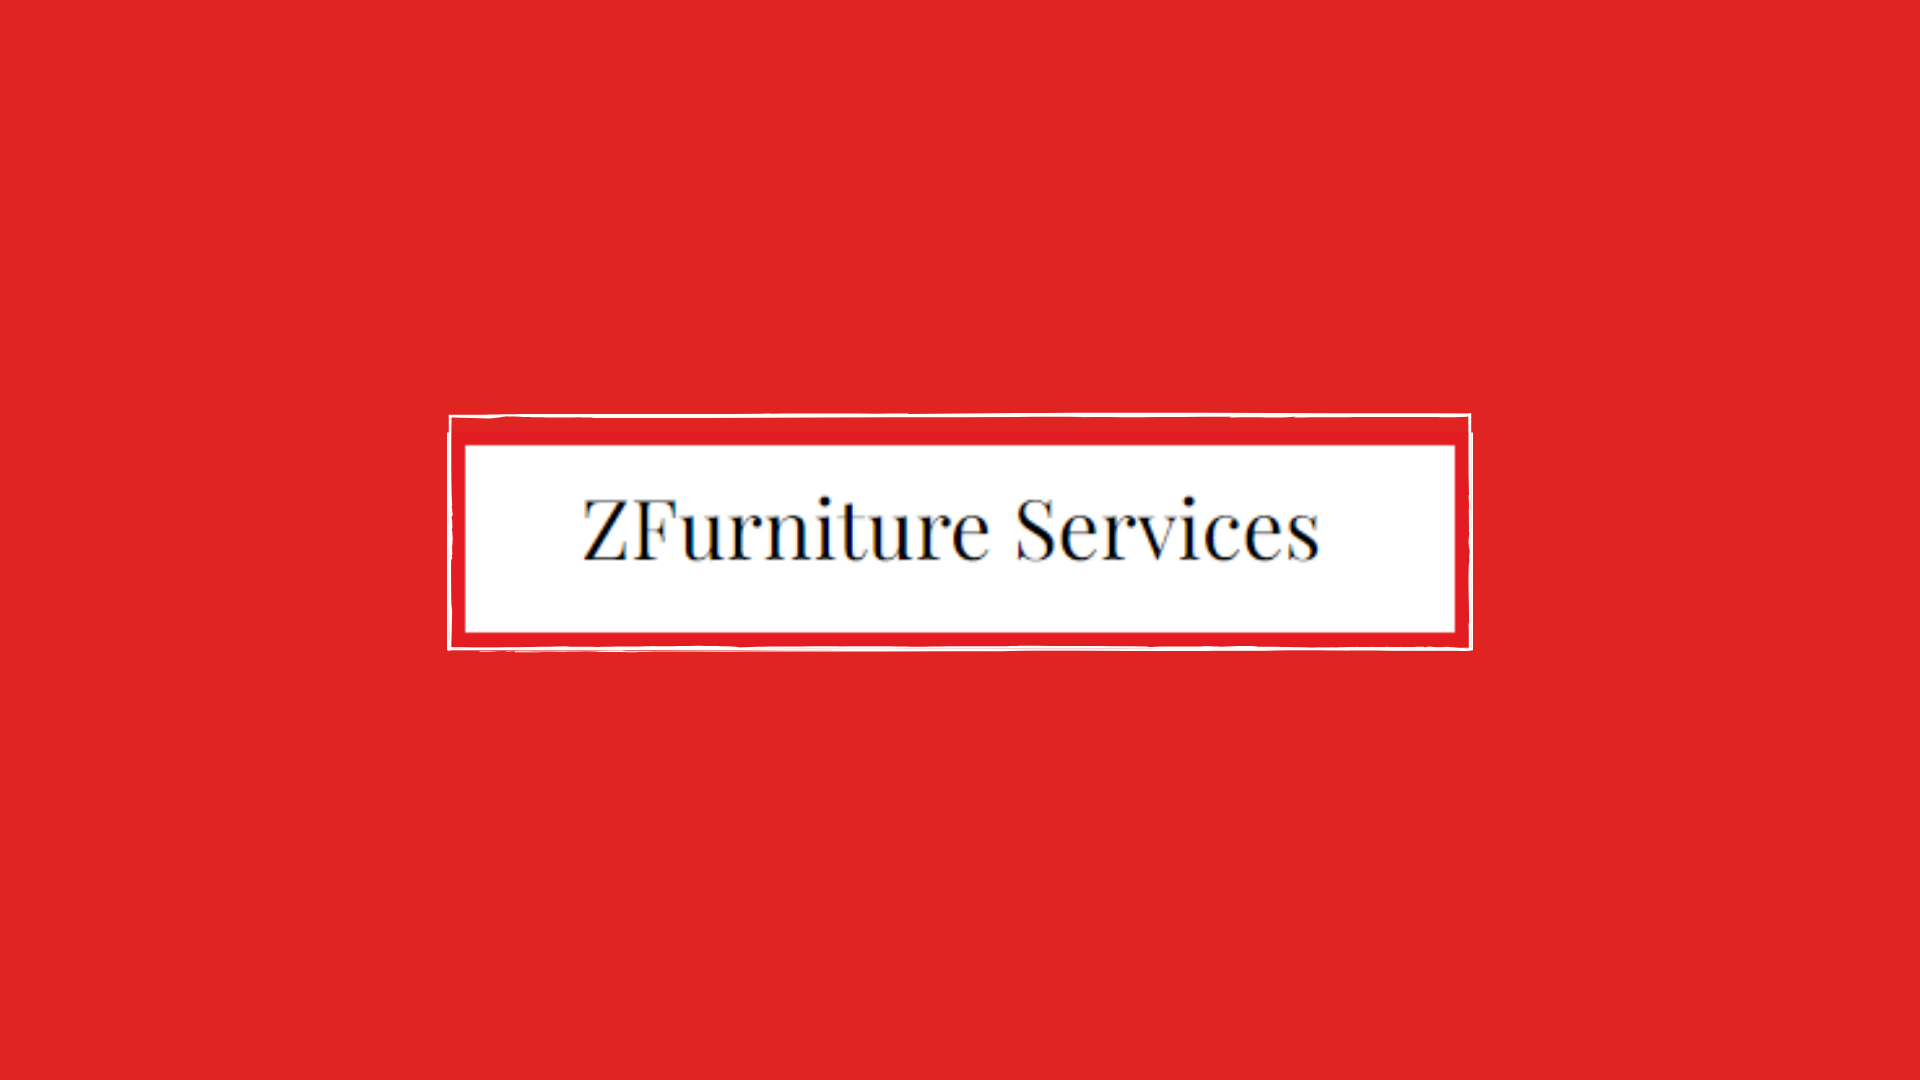 Company logo of zfurniture-services